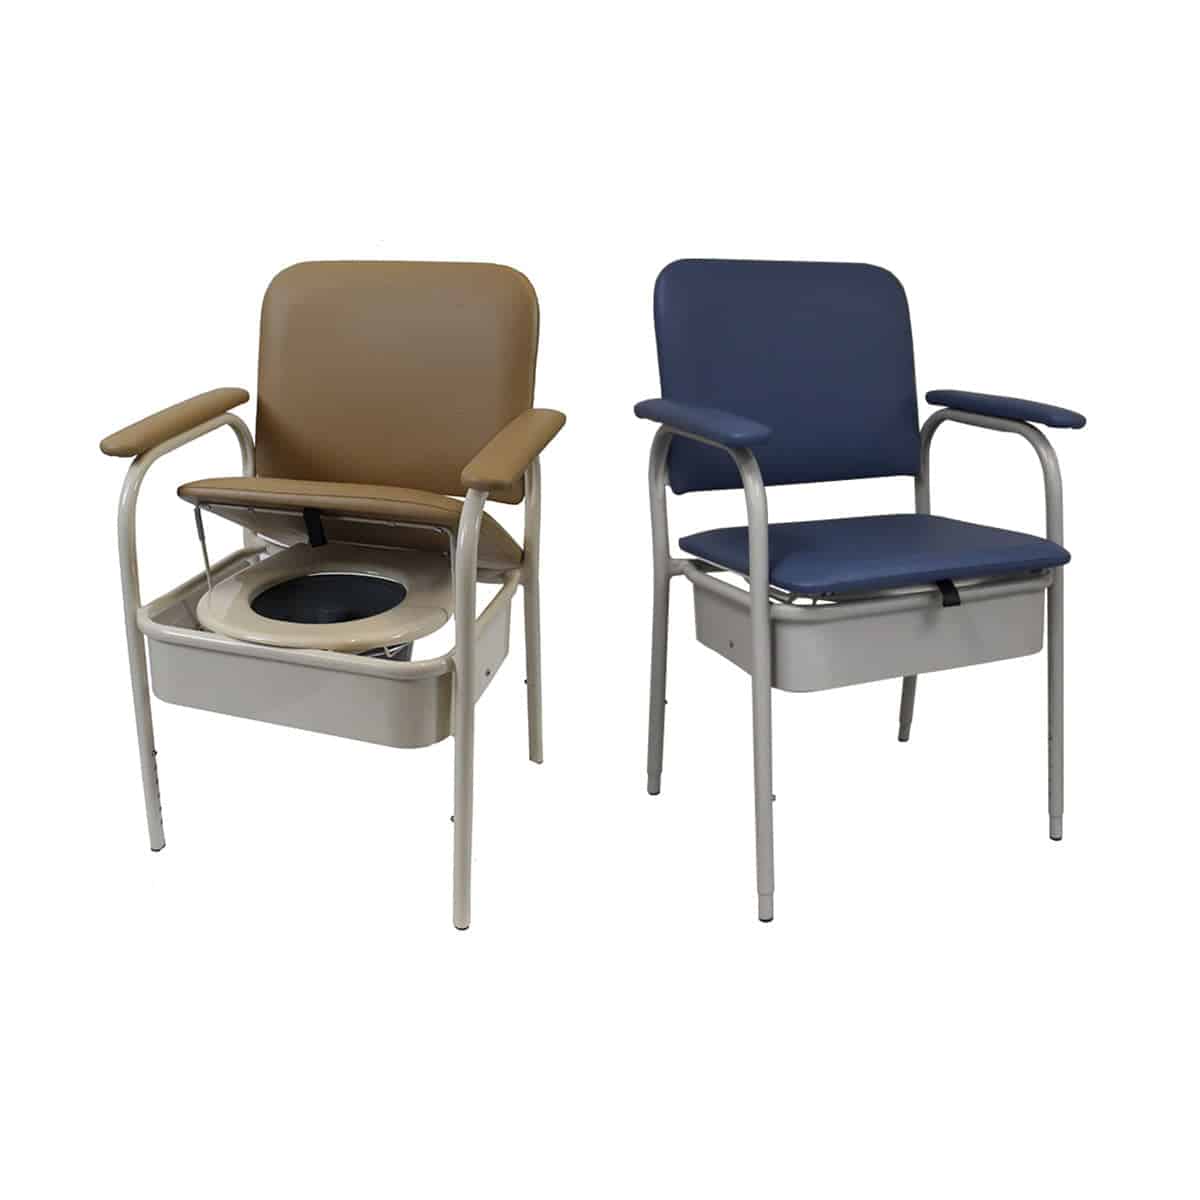 K Care Premium Deluxe Bedside Commode Bariatric